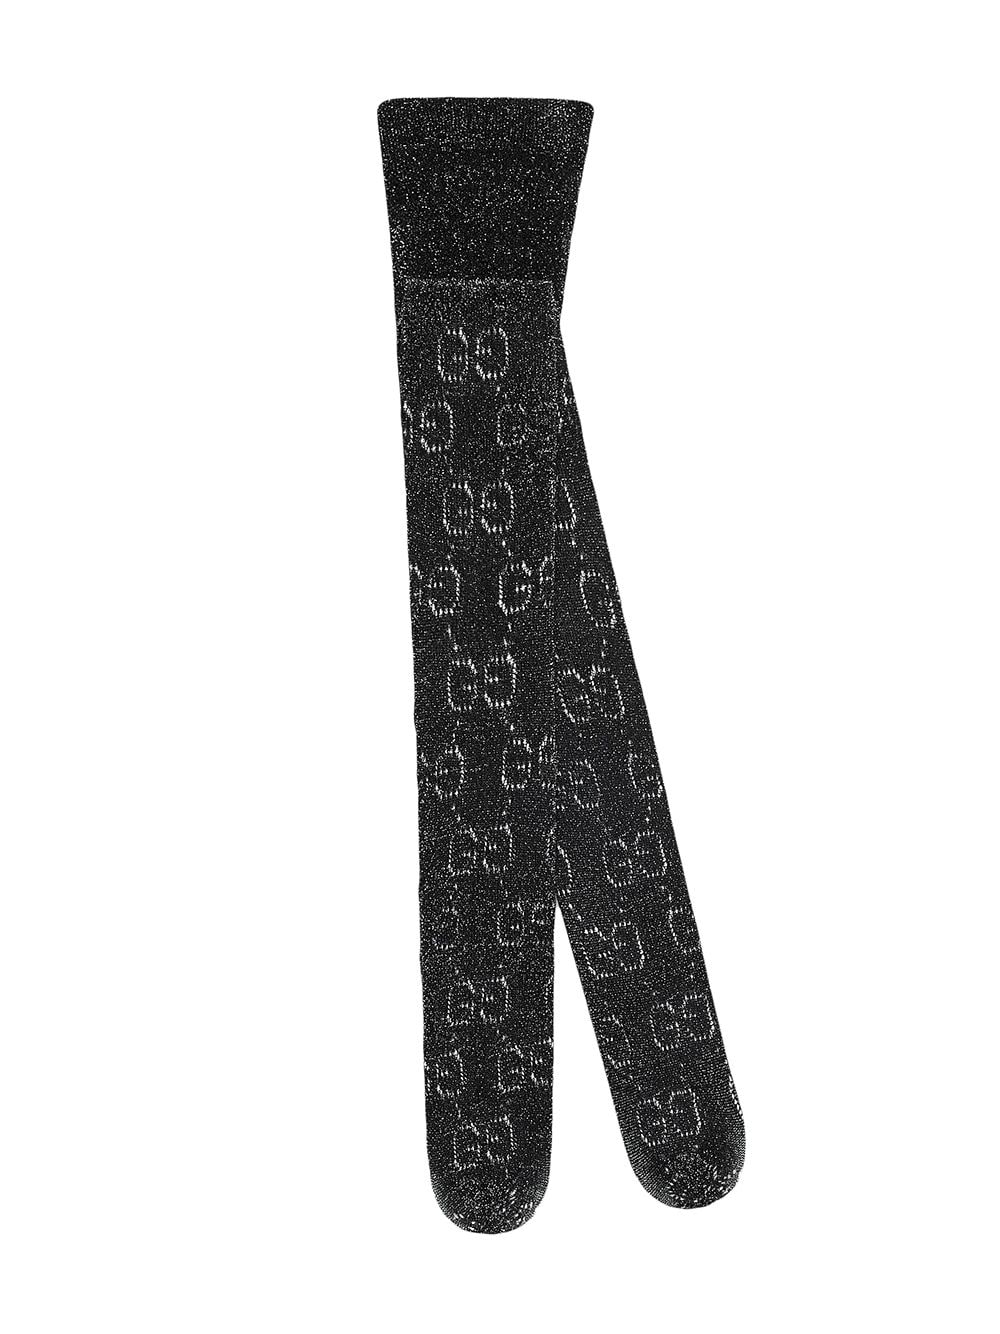 Gucci Tights: Where To Buy Them - SURGEOFSTYLE by Benita